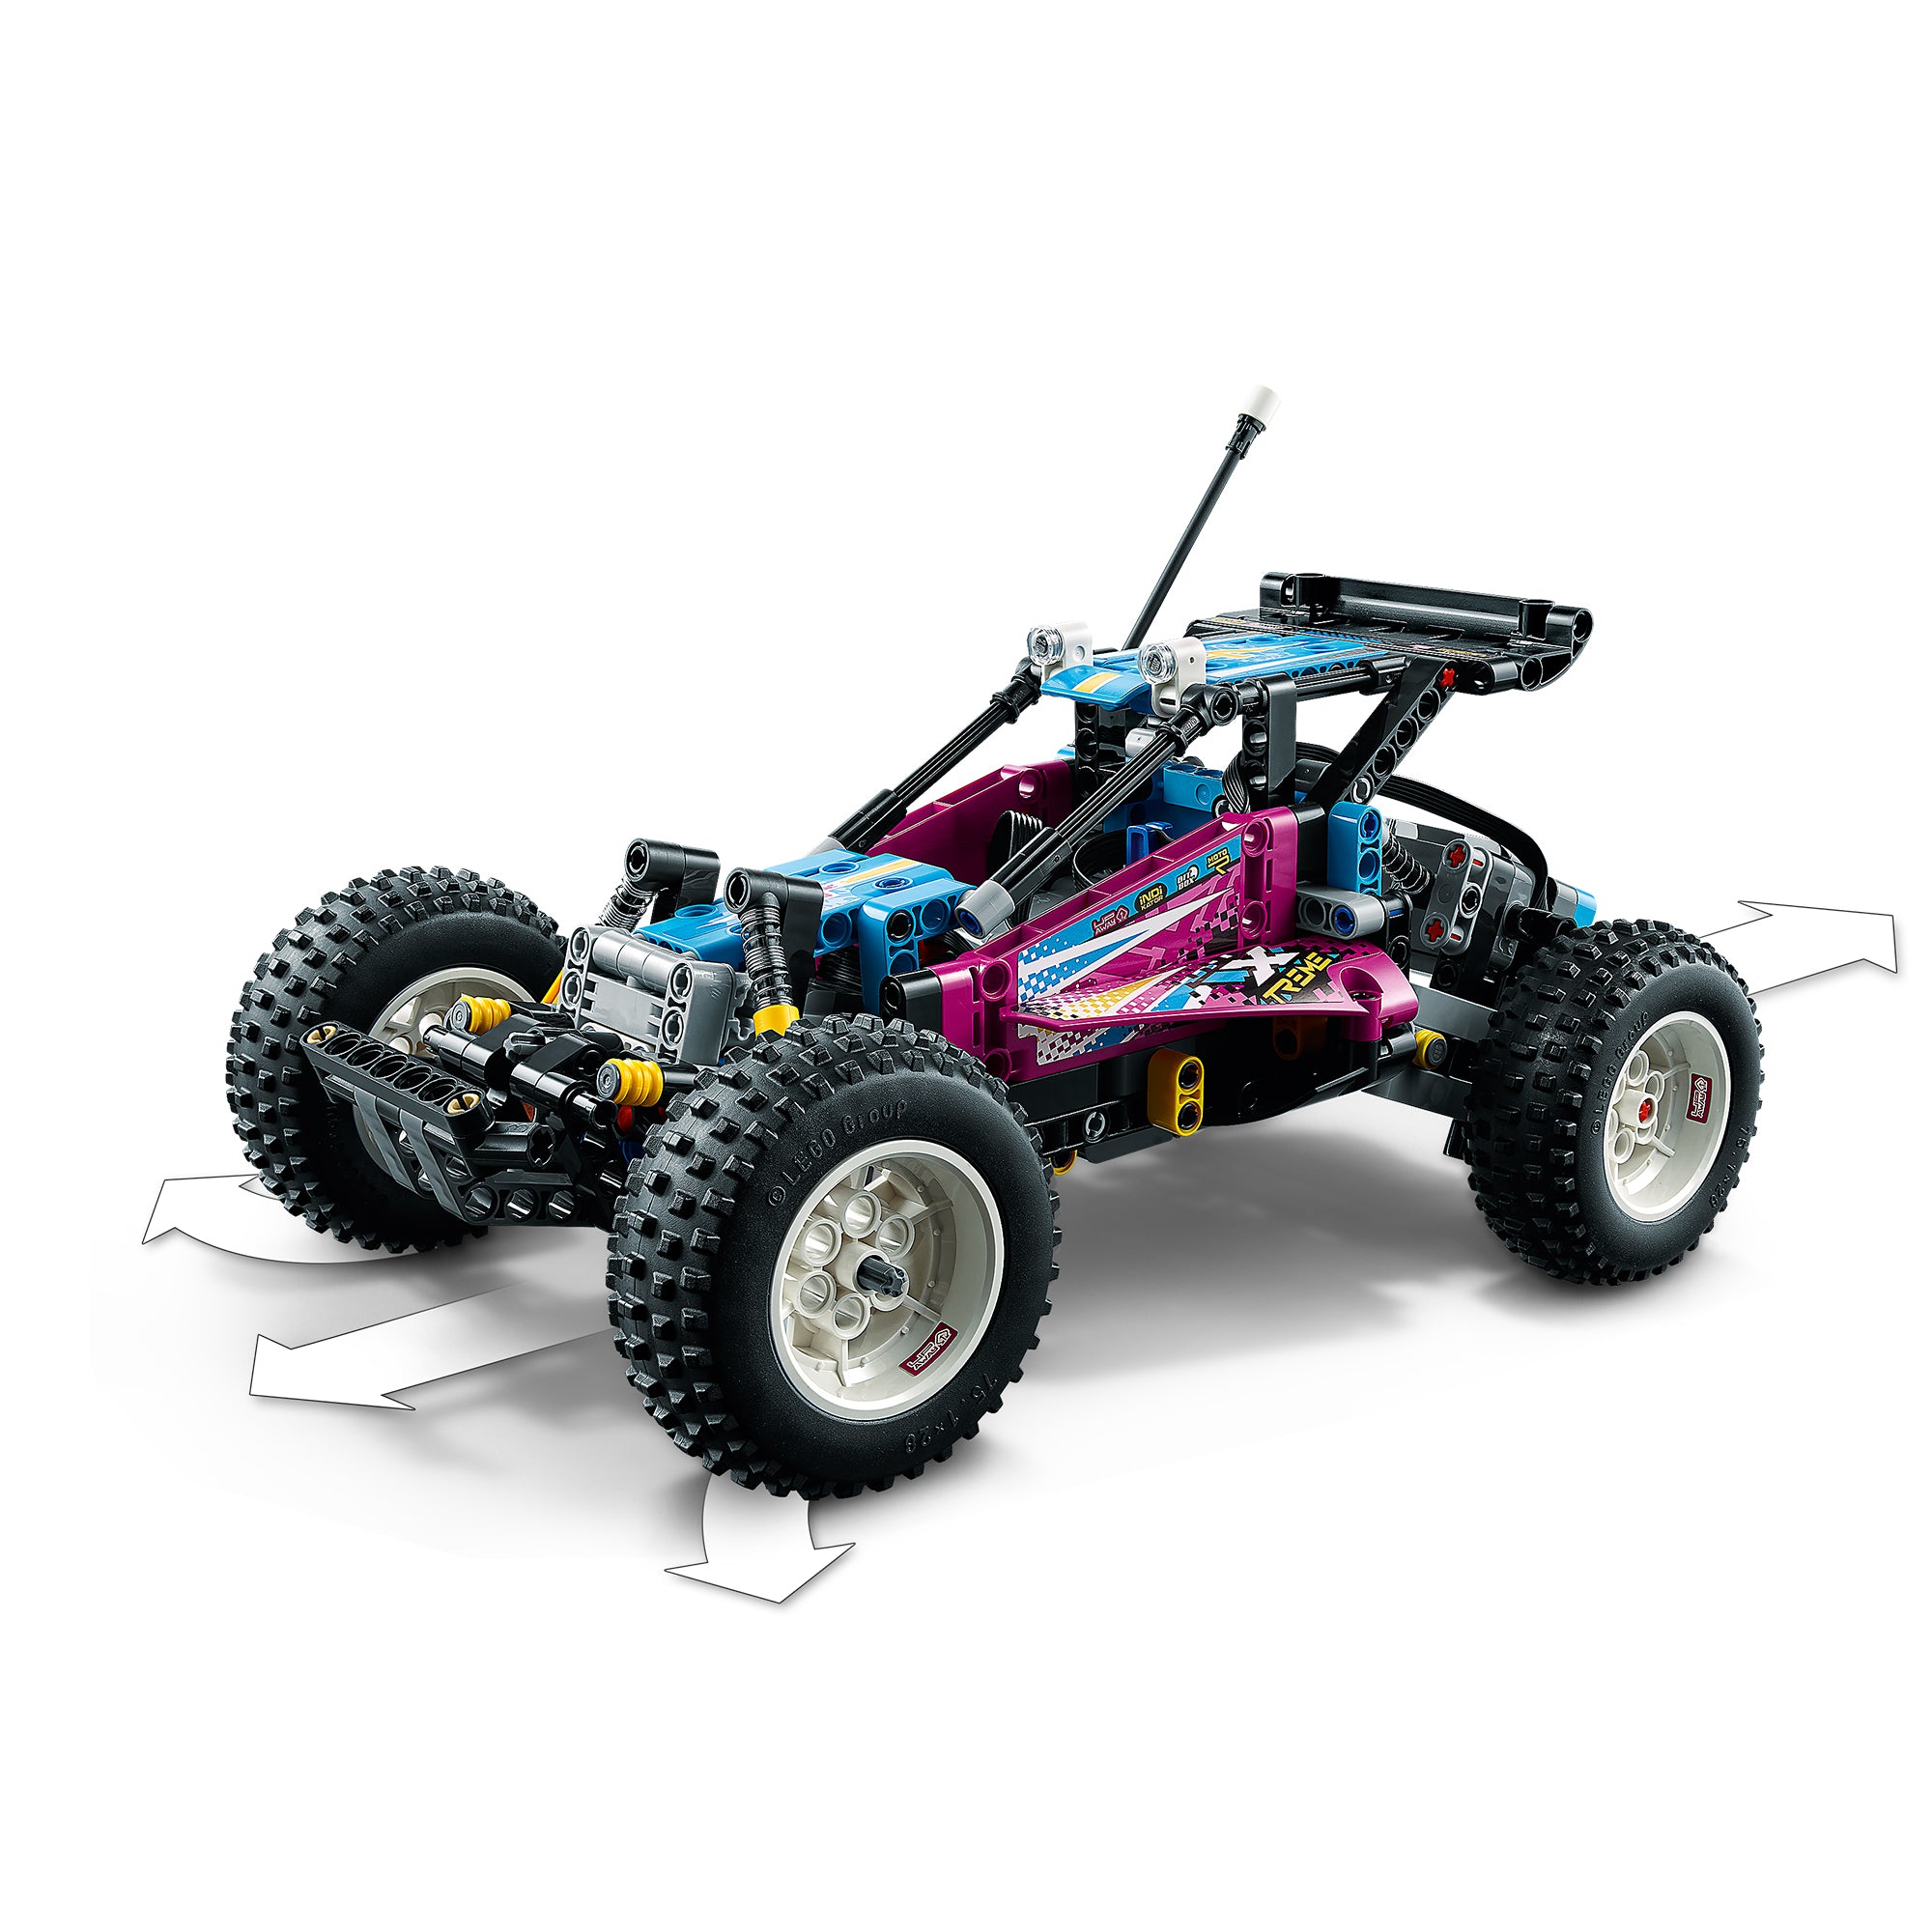 LEGO® Technic Off-Road Buggy App-Controlled Set 42124 Default Title